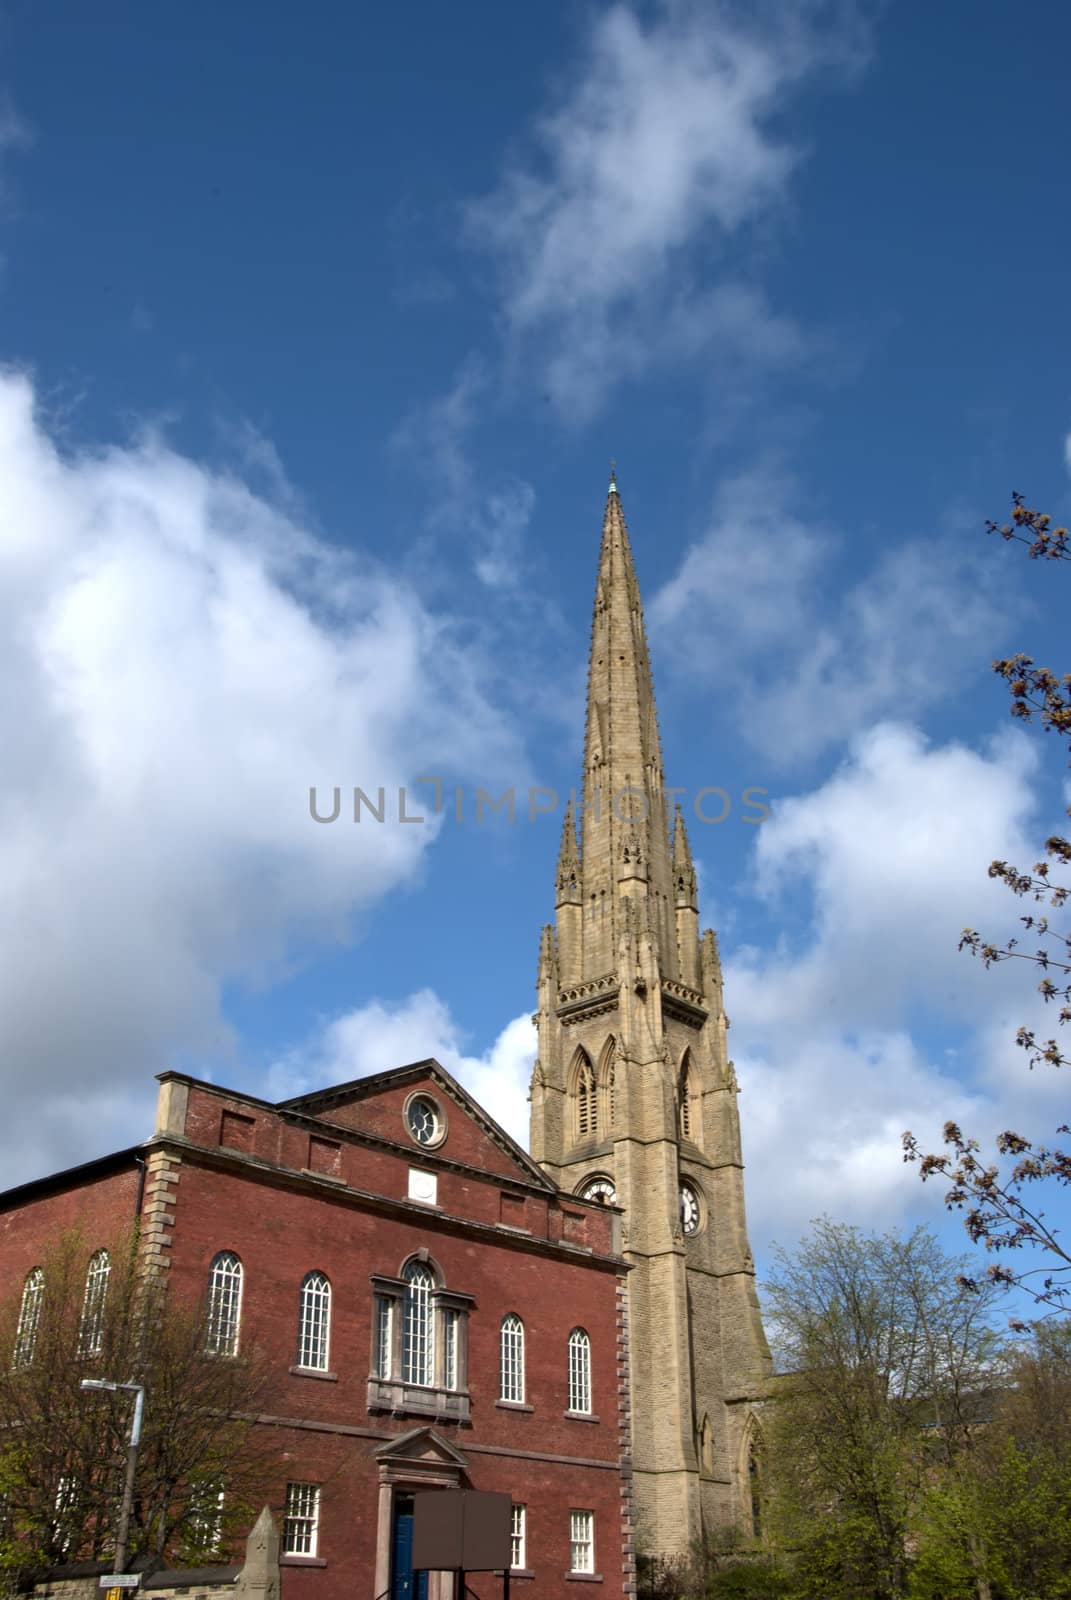 A red brick former chapel and a ruined church spire in Halifax Yorkshire